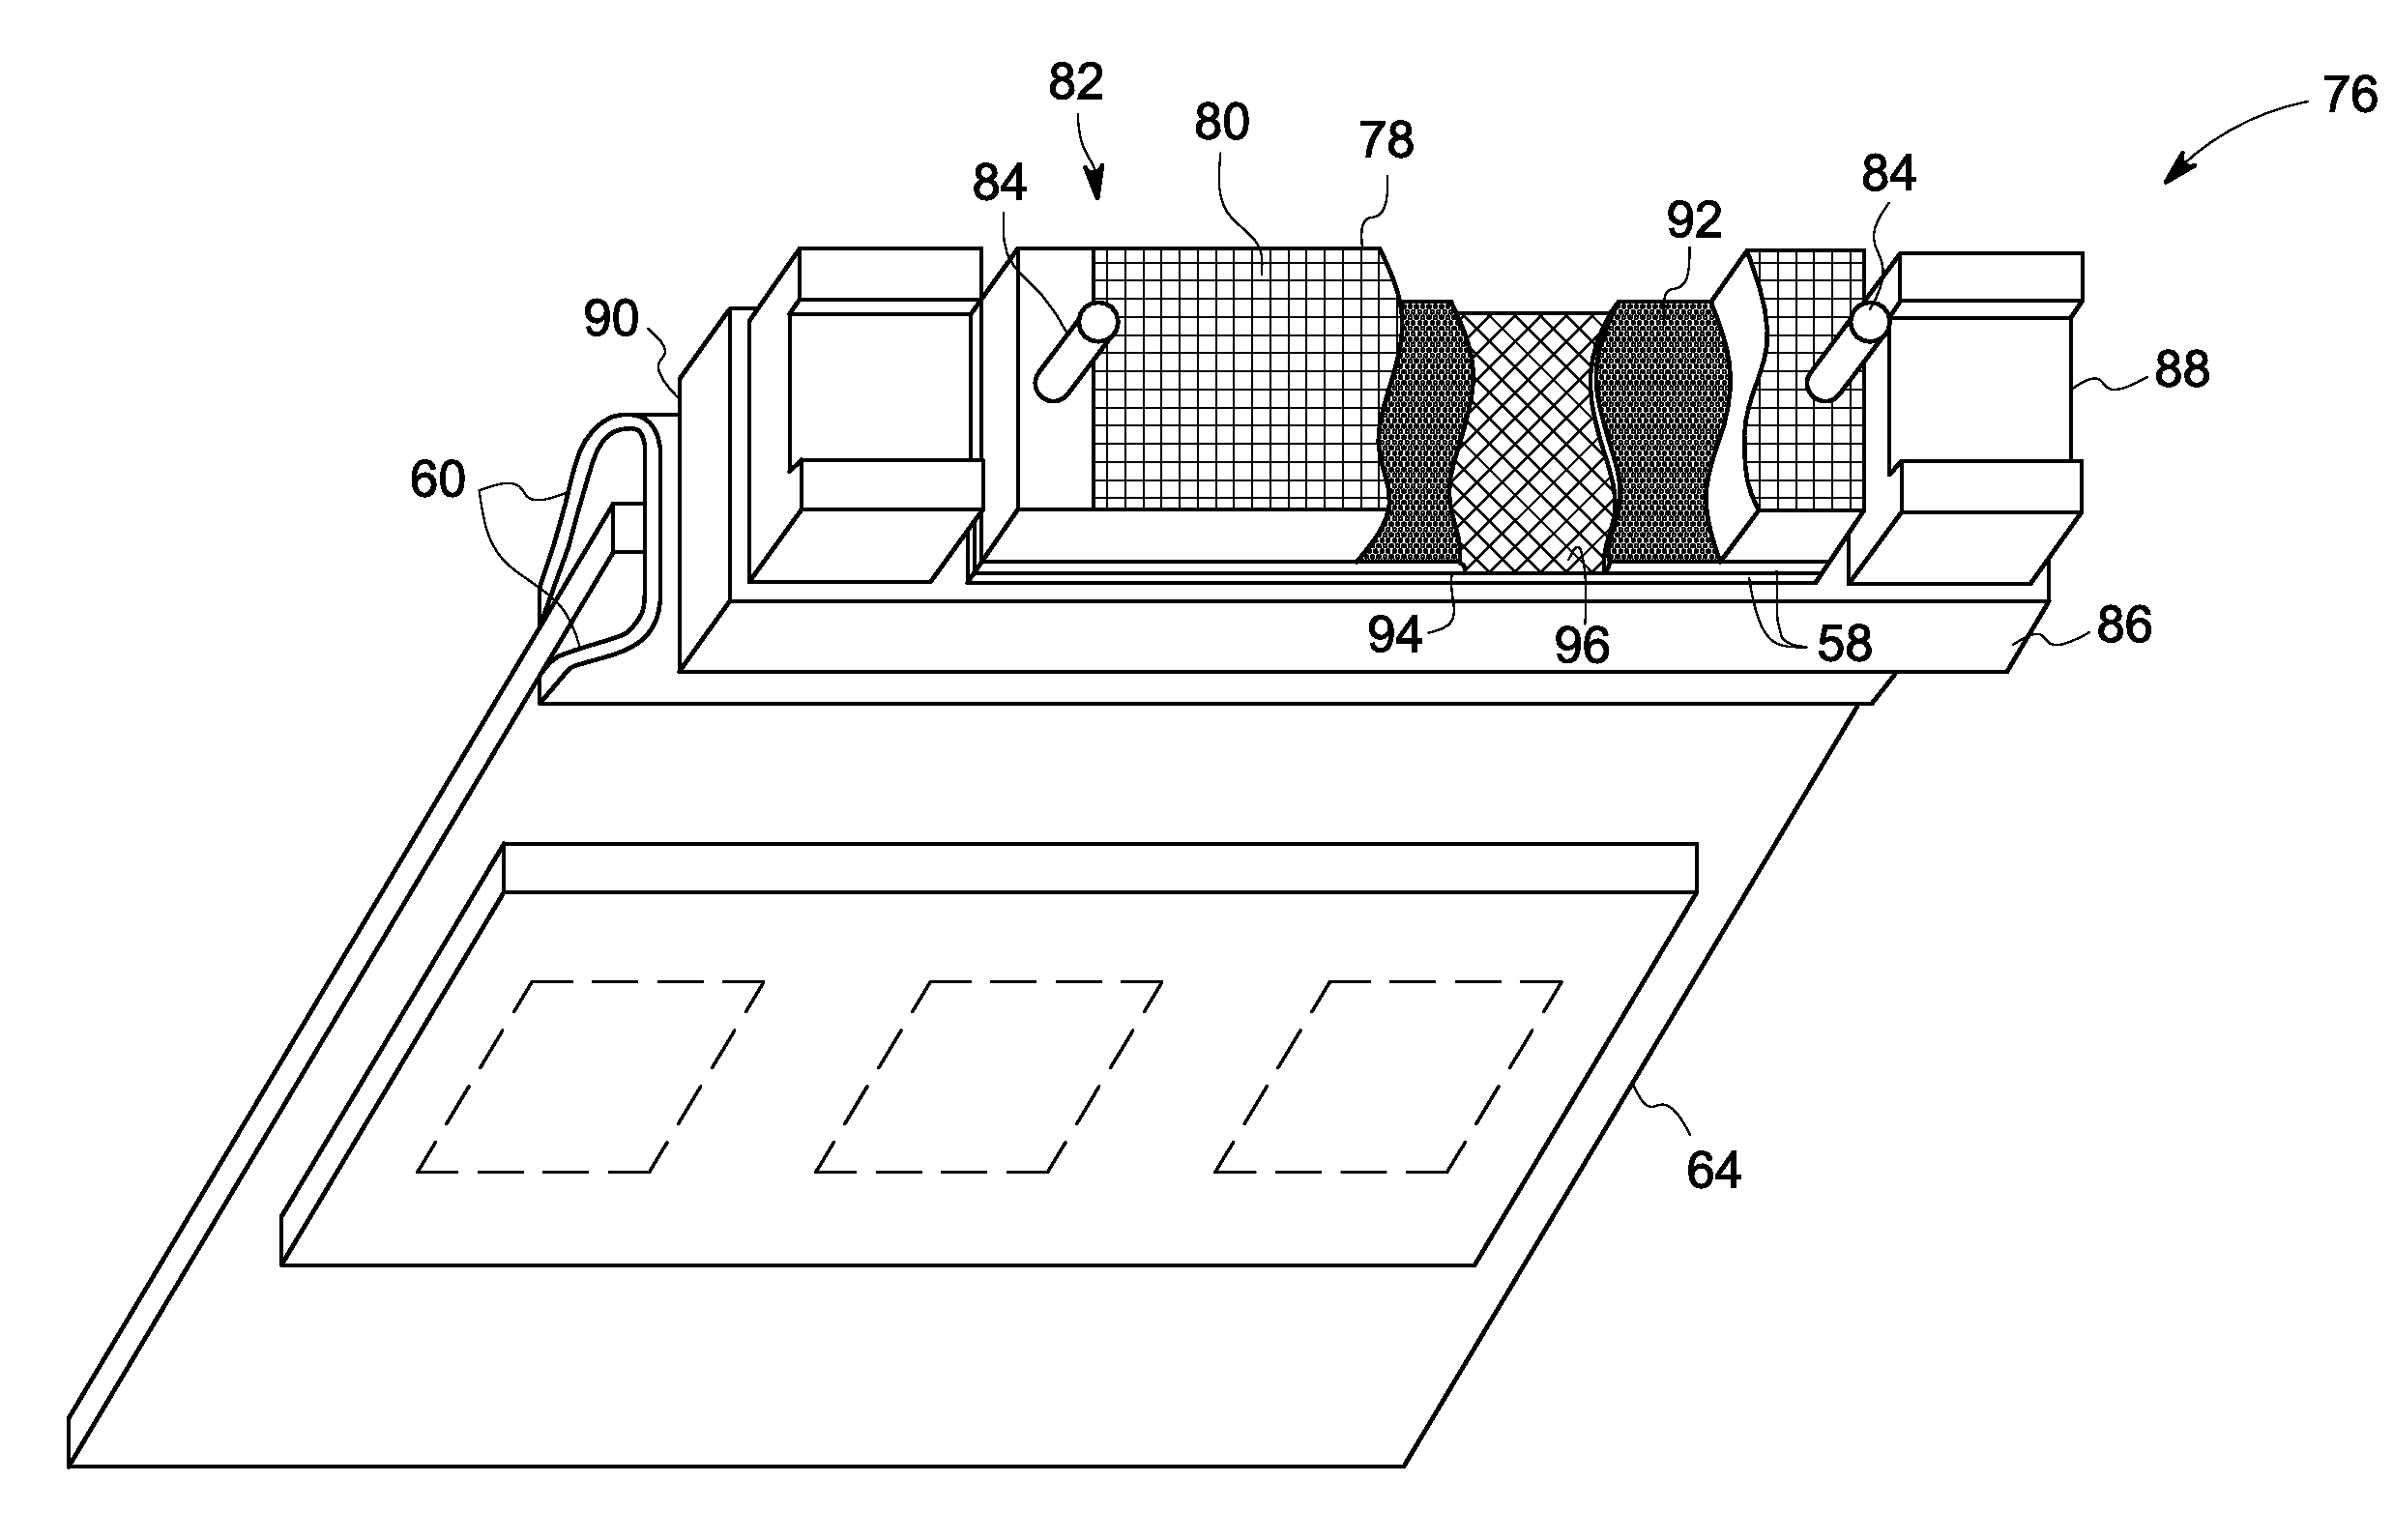 Multi-layer radiation detector assembly